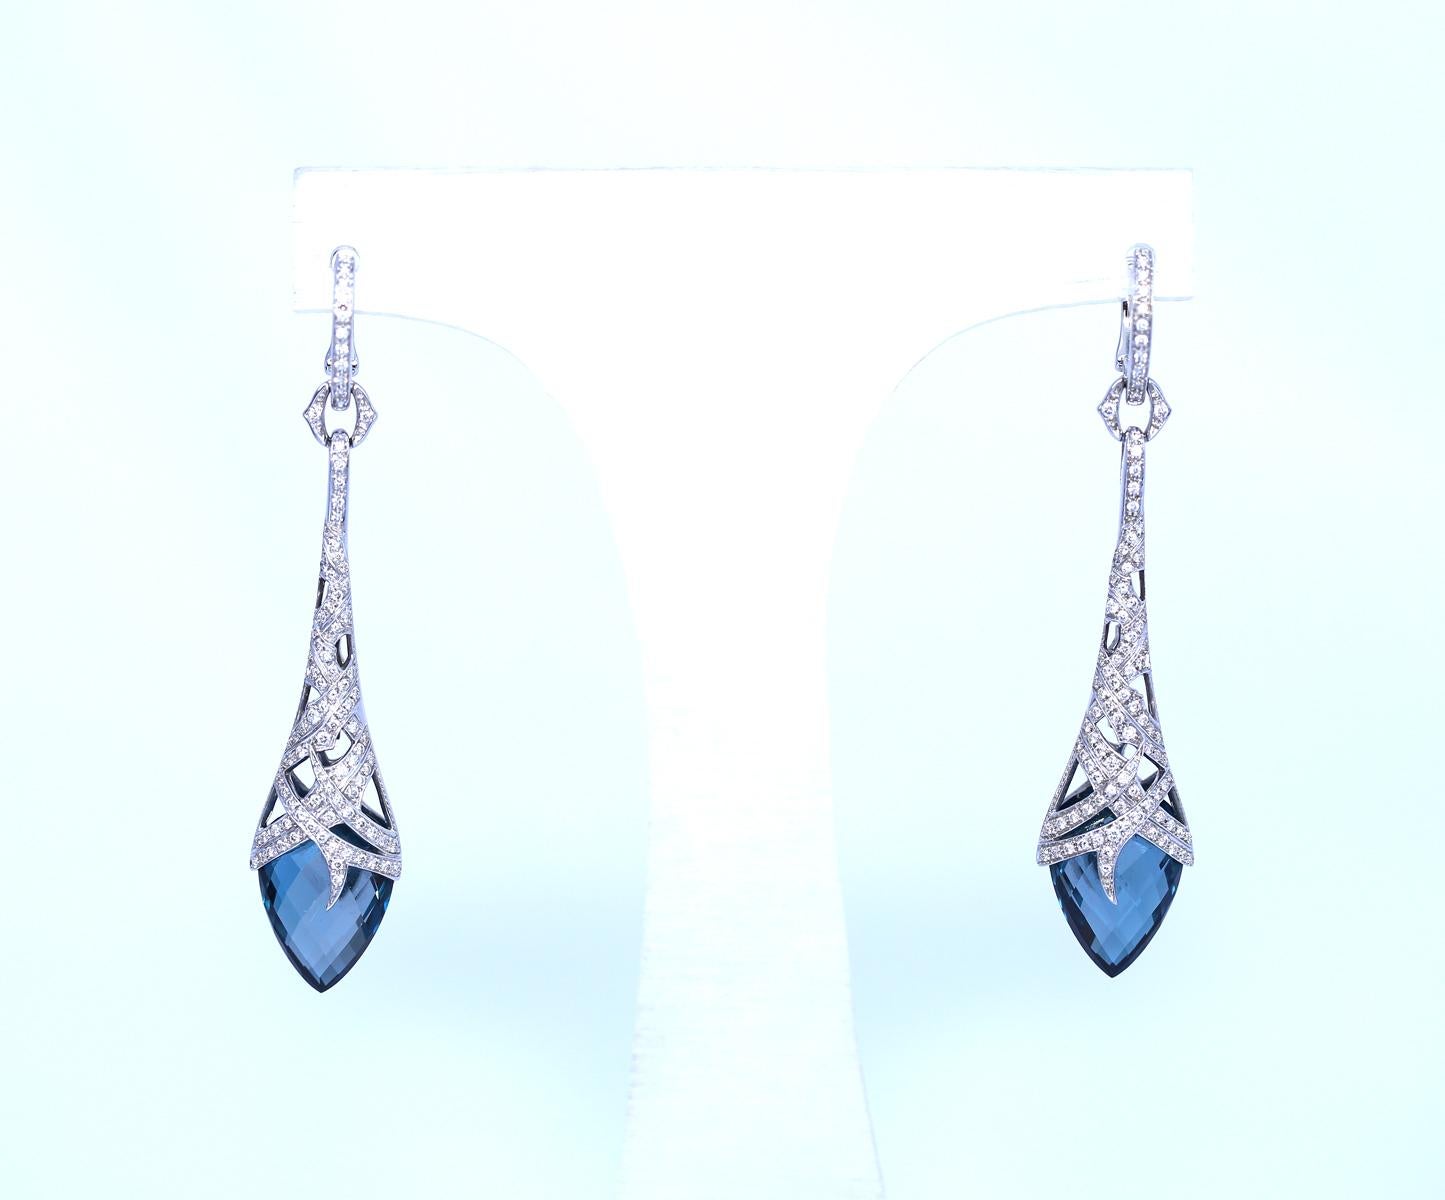 A Pair of Blue Topaz and Diamond 'Thorn' Earrings by Stephen Webster. Created around 2018. Two oval-shaped faceted blue topaz drops, total of 22.18 Carats and Round brilliant-cut diamonds, total approximate weight of 1.00 Carat. Mounted in 18 Karat